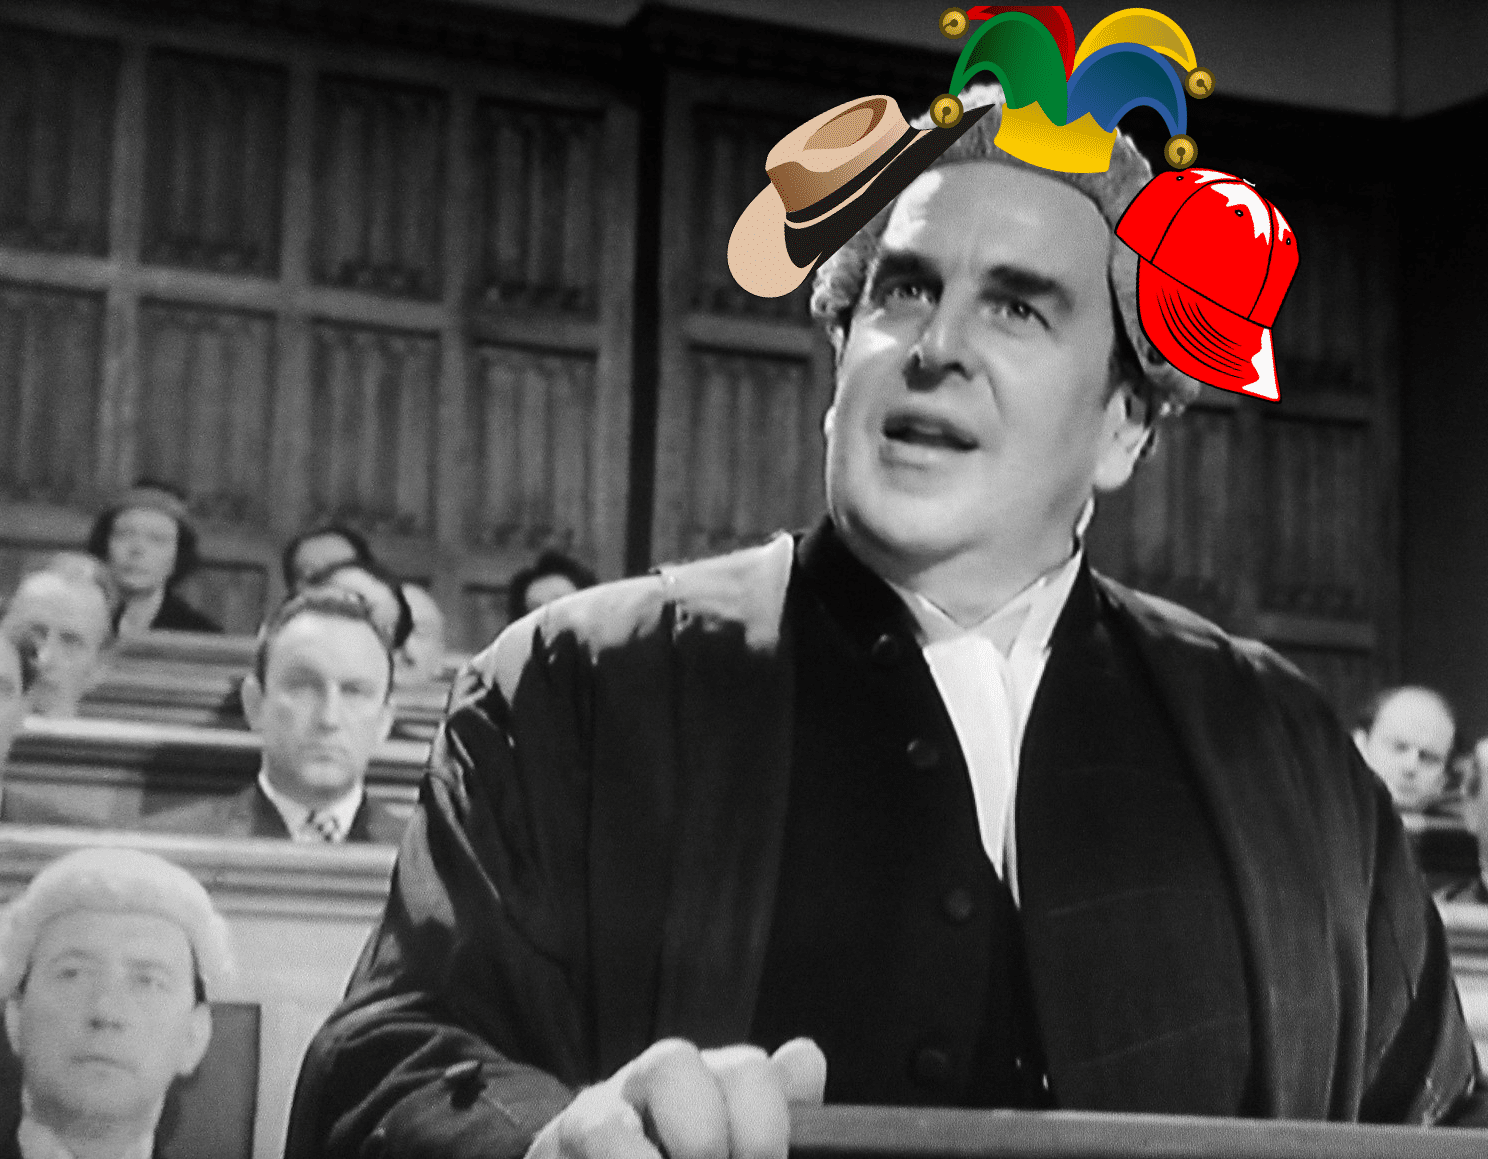 Barrister with hats